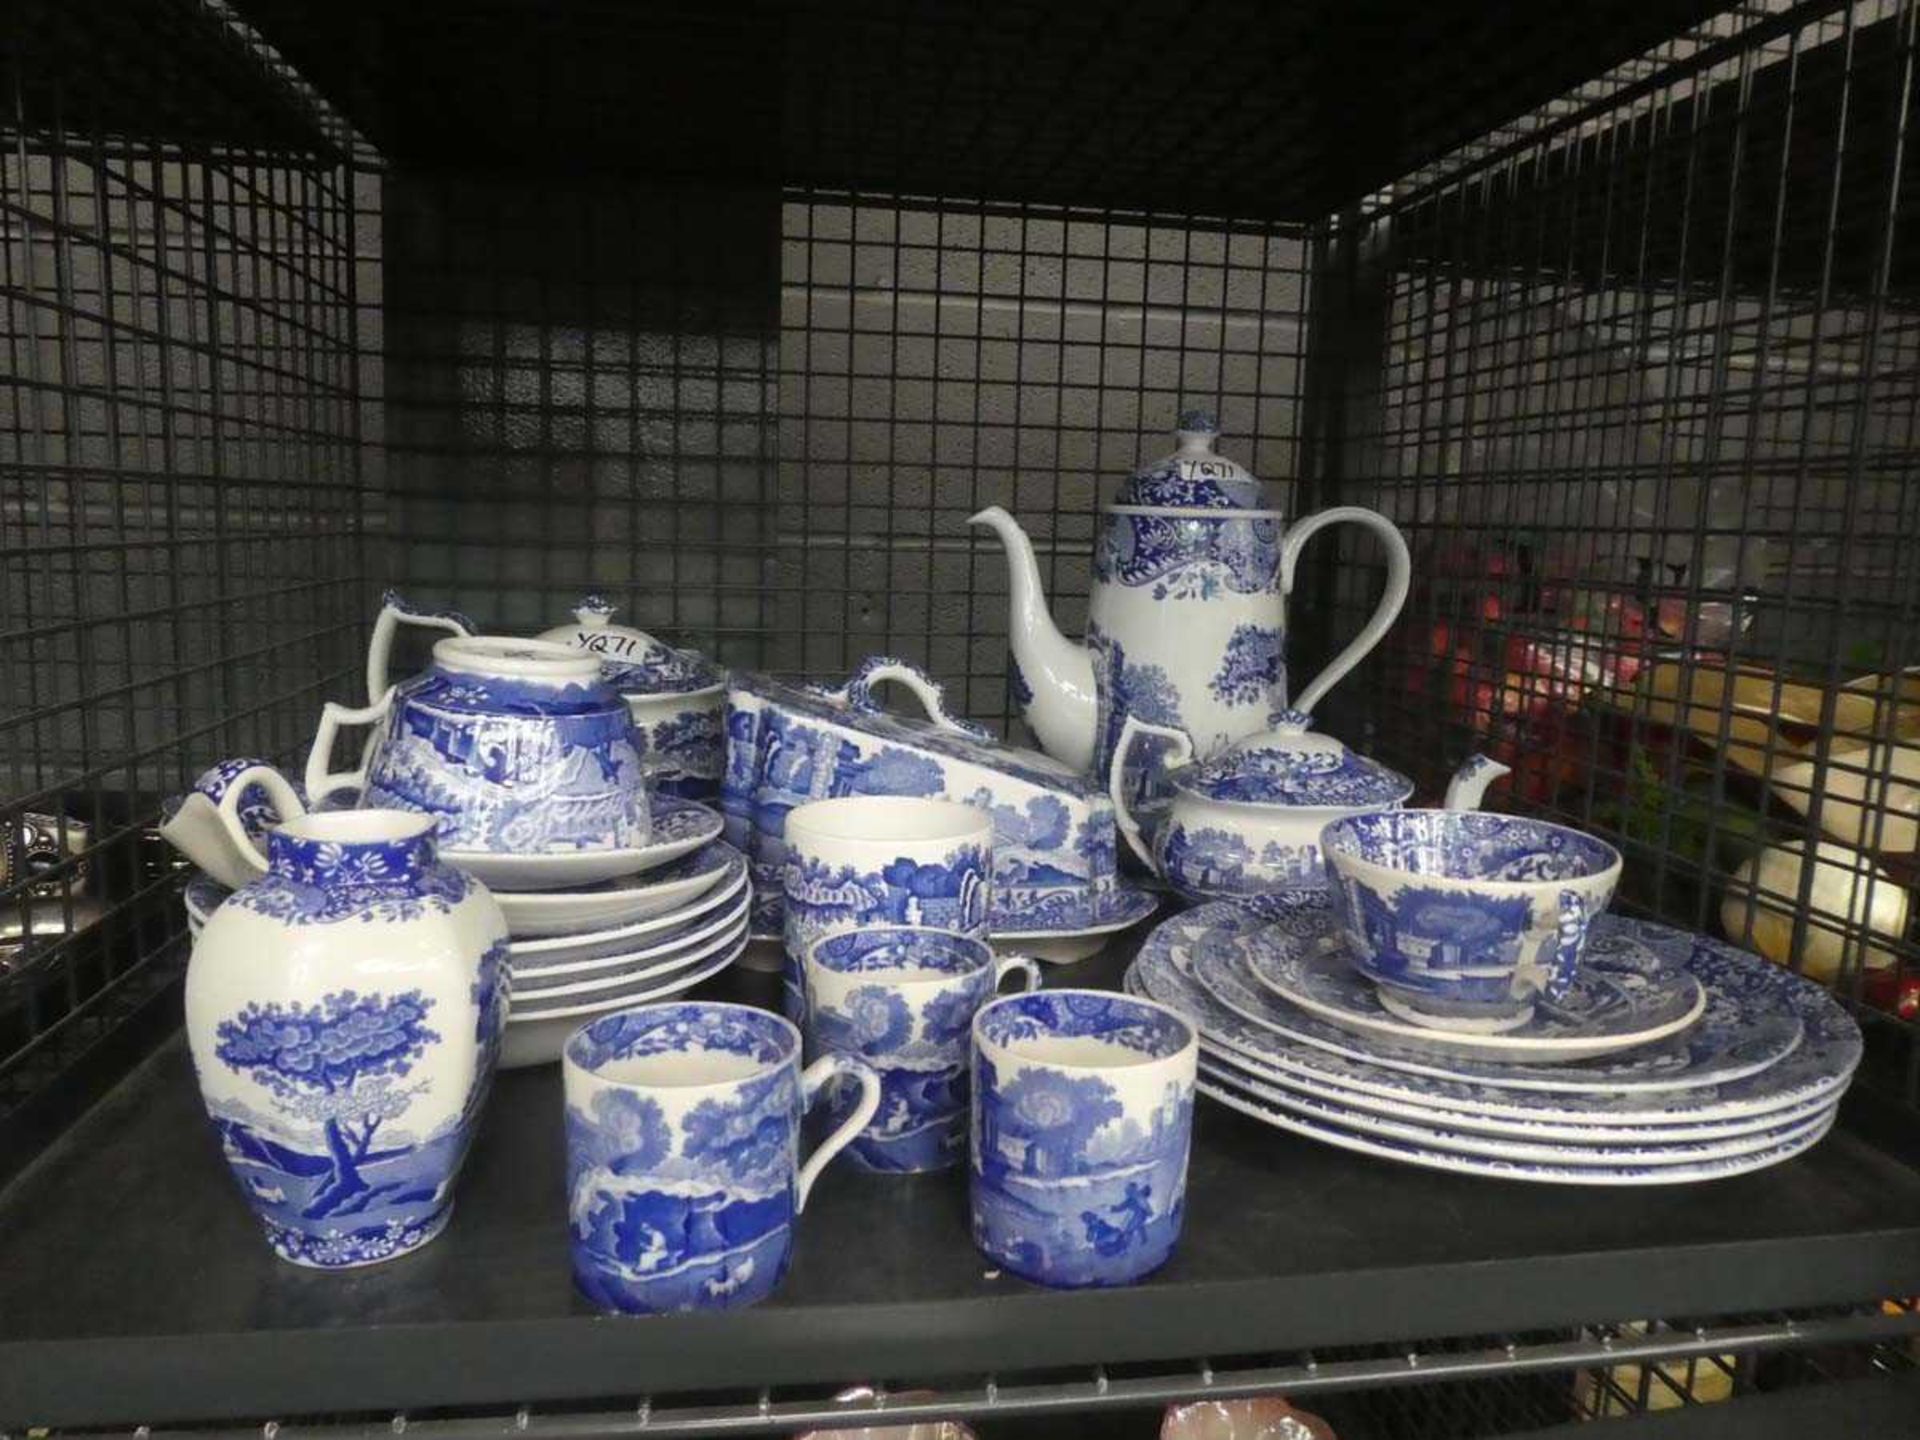 Cage containing a quantity of blue and white Spode crockery